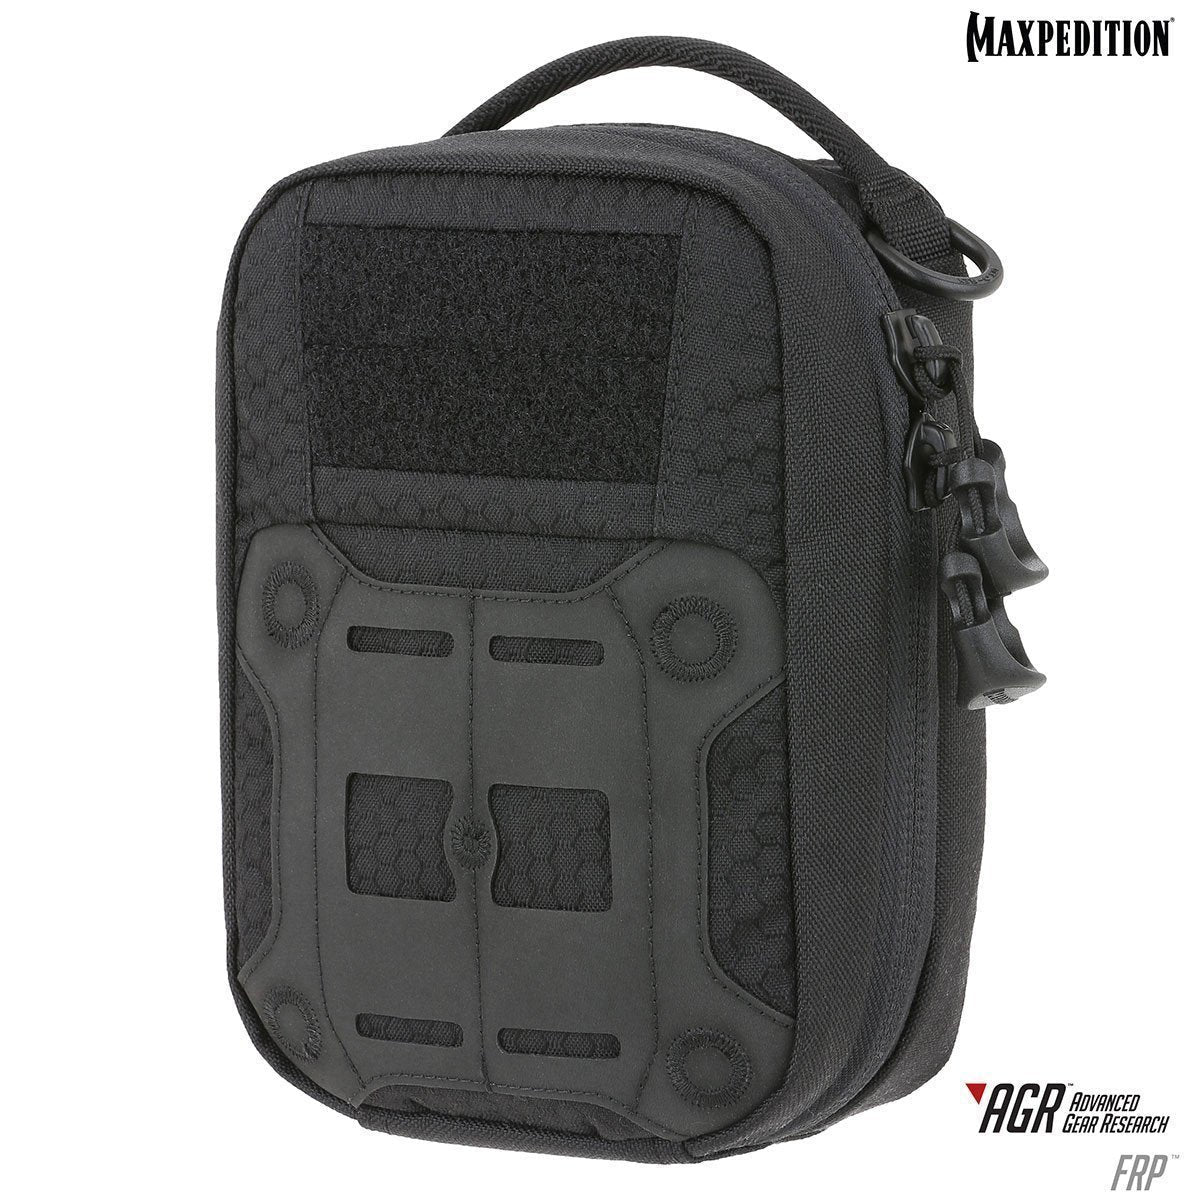 Maxpedition FRP First Response Pouch Accessories Maxpedition Gray Tactical Gear Supplier Tactical Distributors Australia